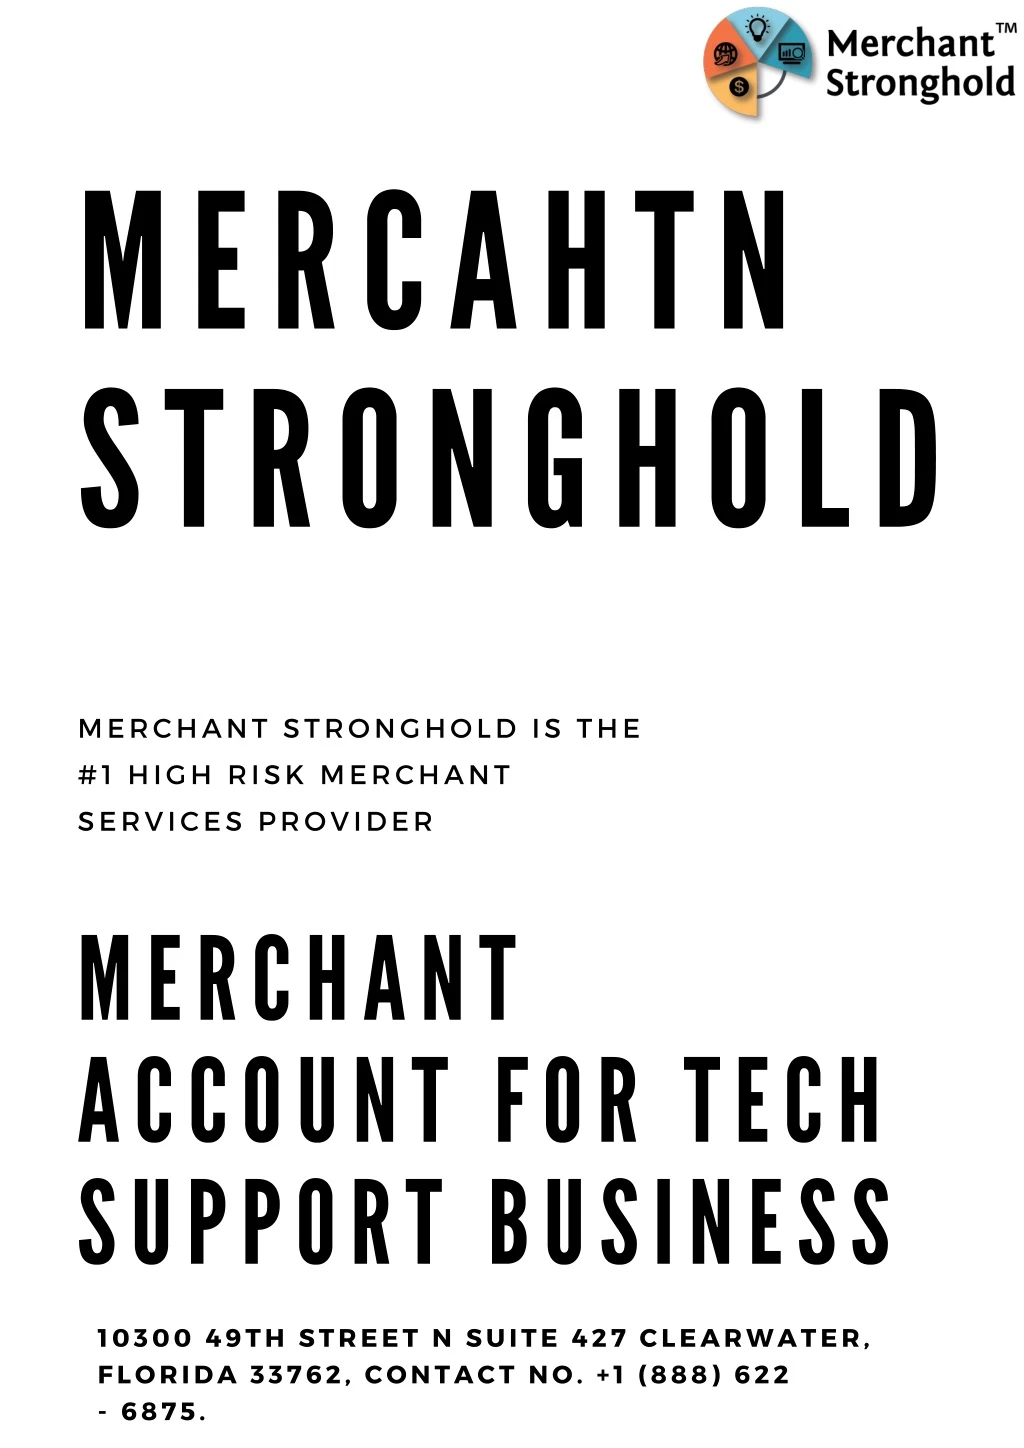 merc a htn stronghold